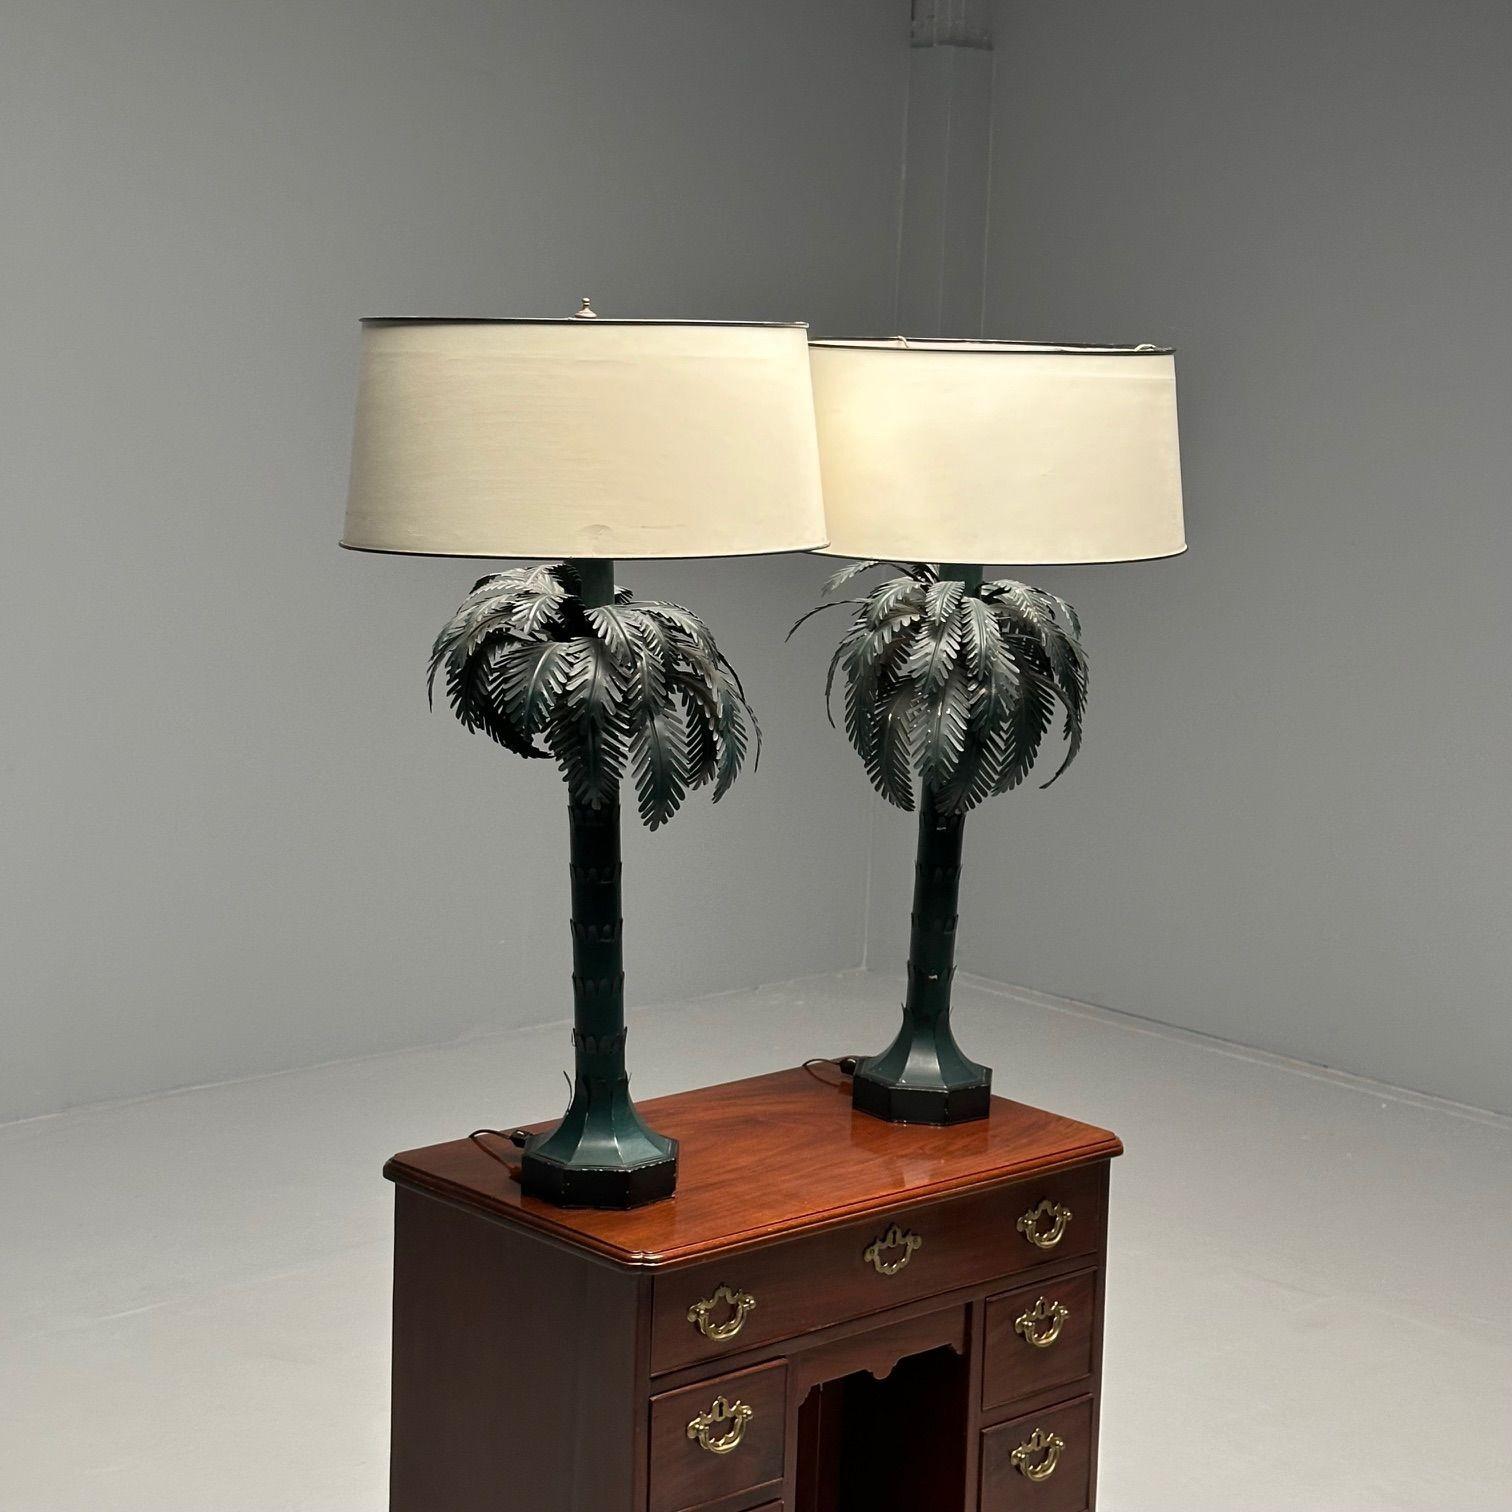 Maison Jansen Style, Mid-Century Modern, Palm Tree Lamps, Green, Metal, 1970s For Sale 1